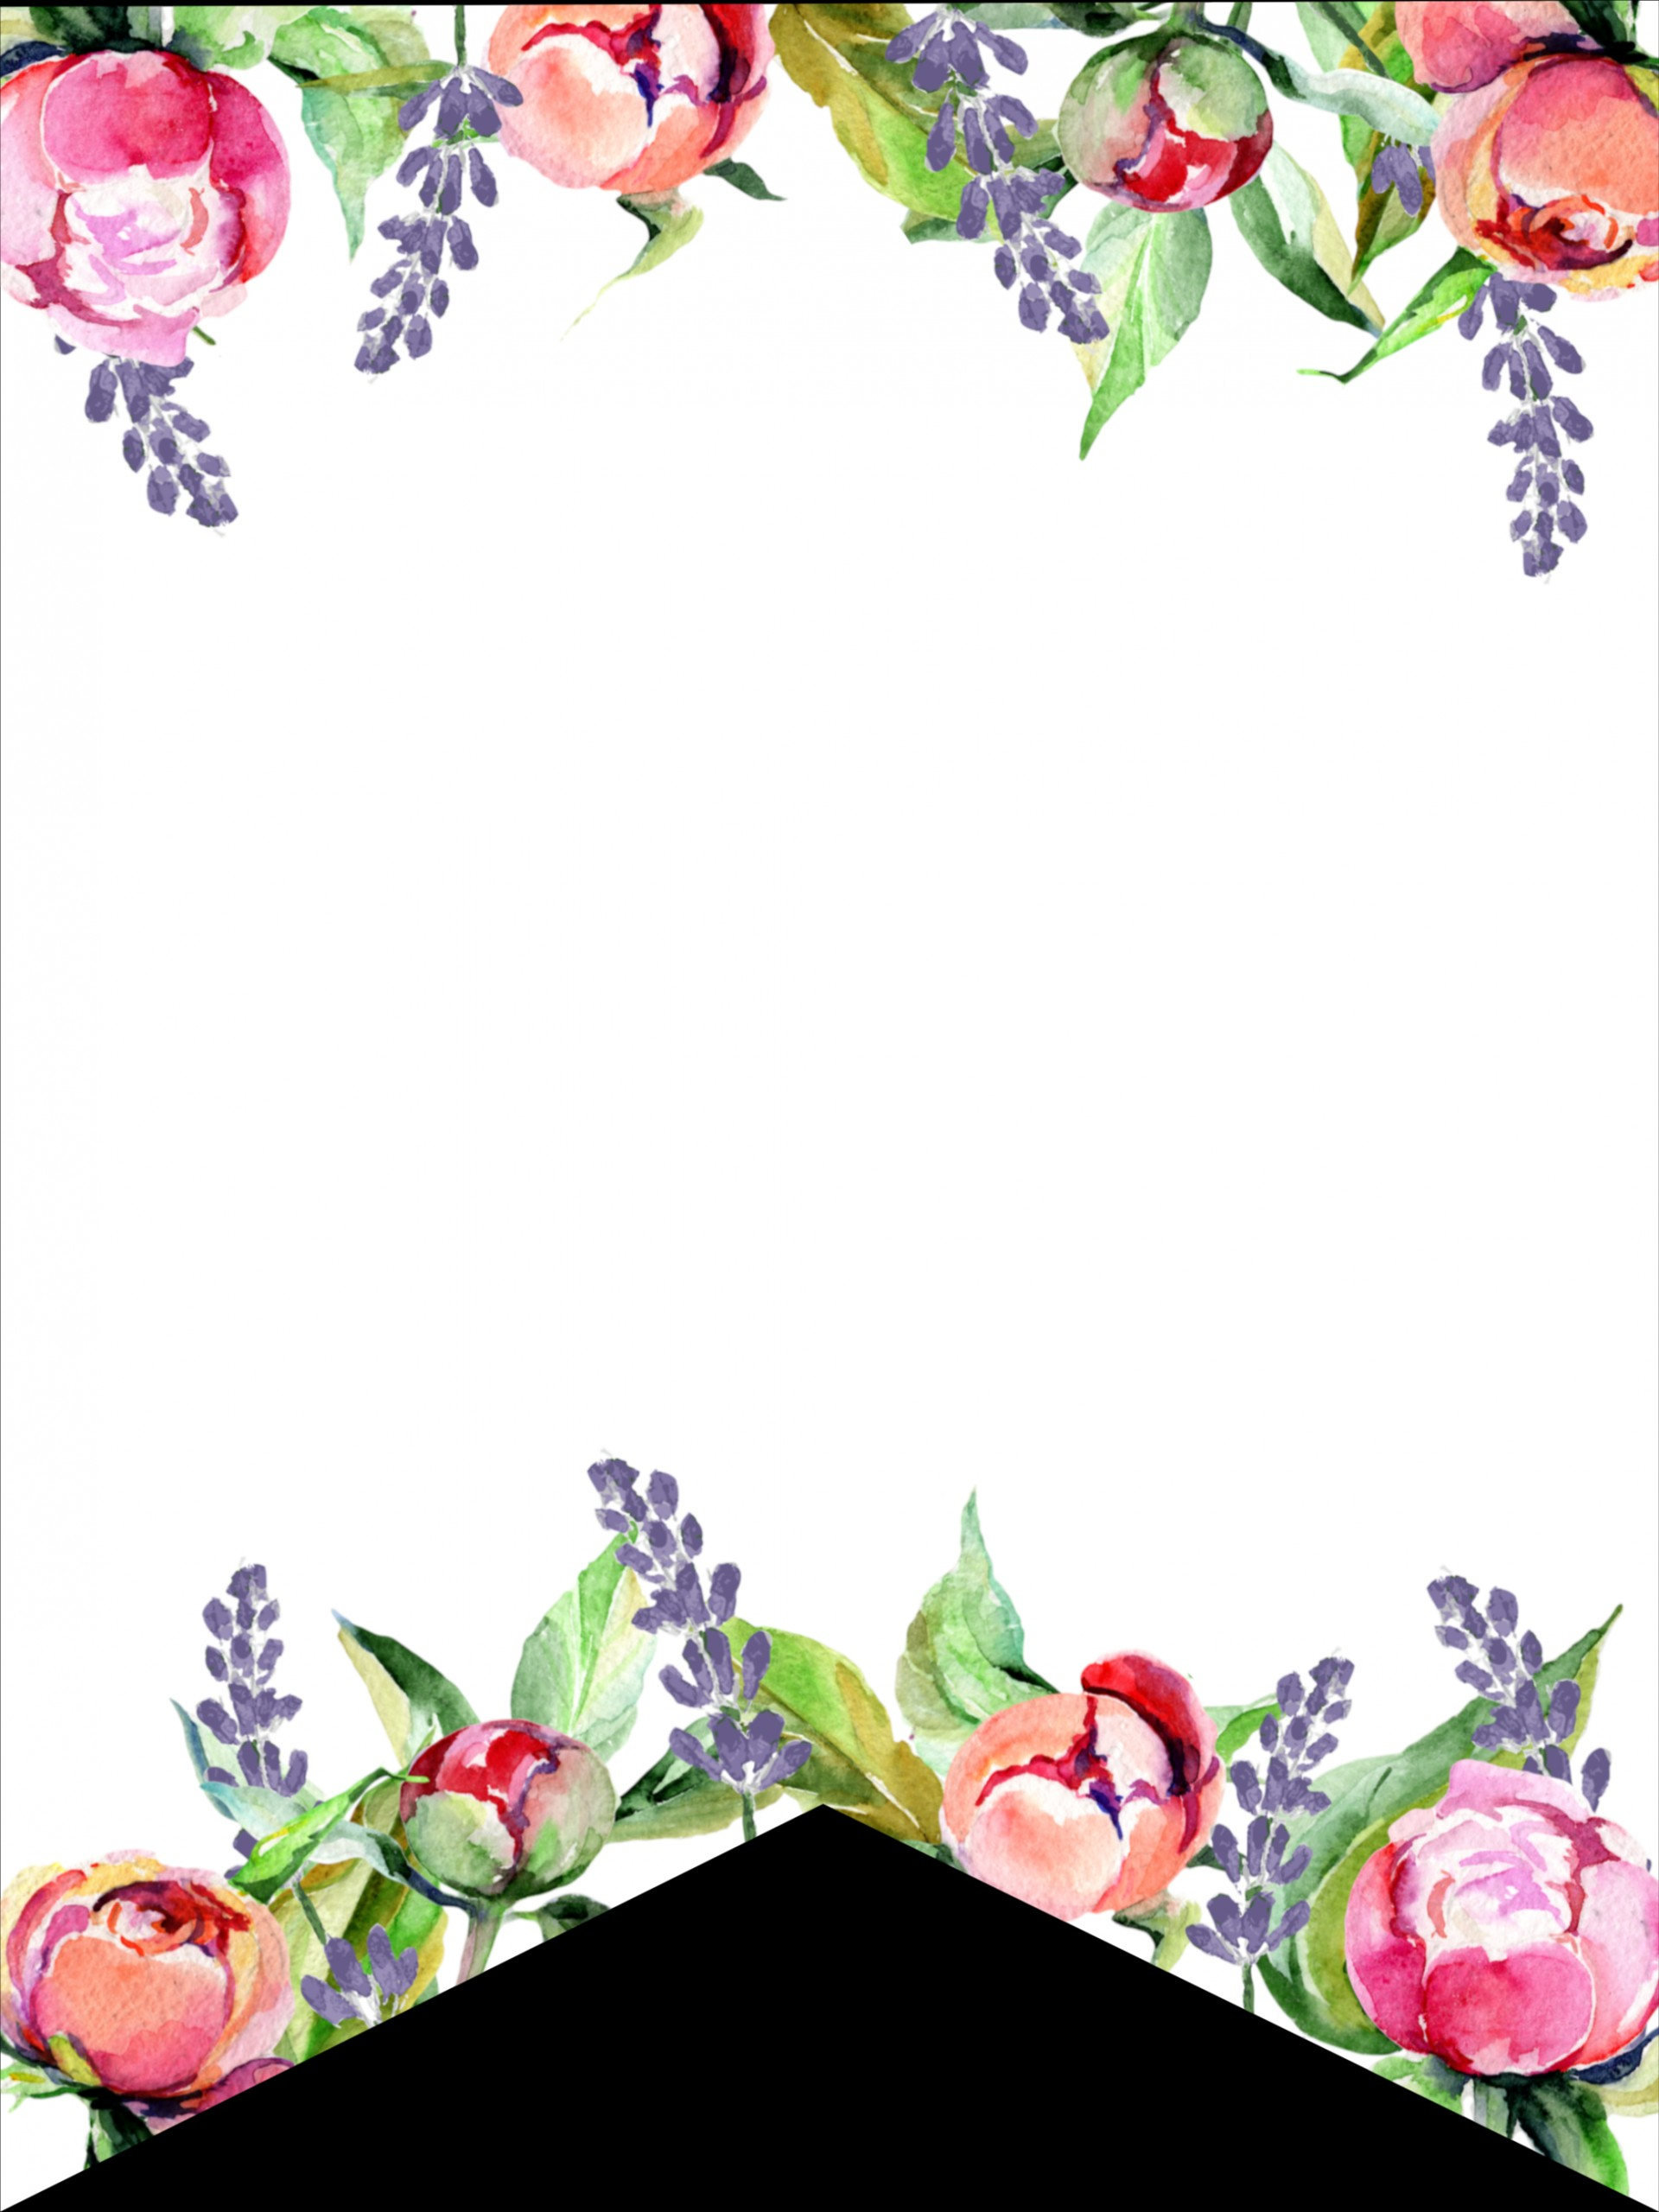 011 Template Ideas Free Printable Banner Floral Wondrous In Banner Cut Out Template